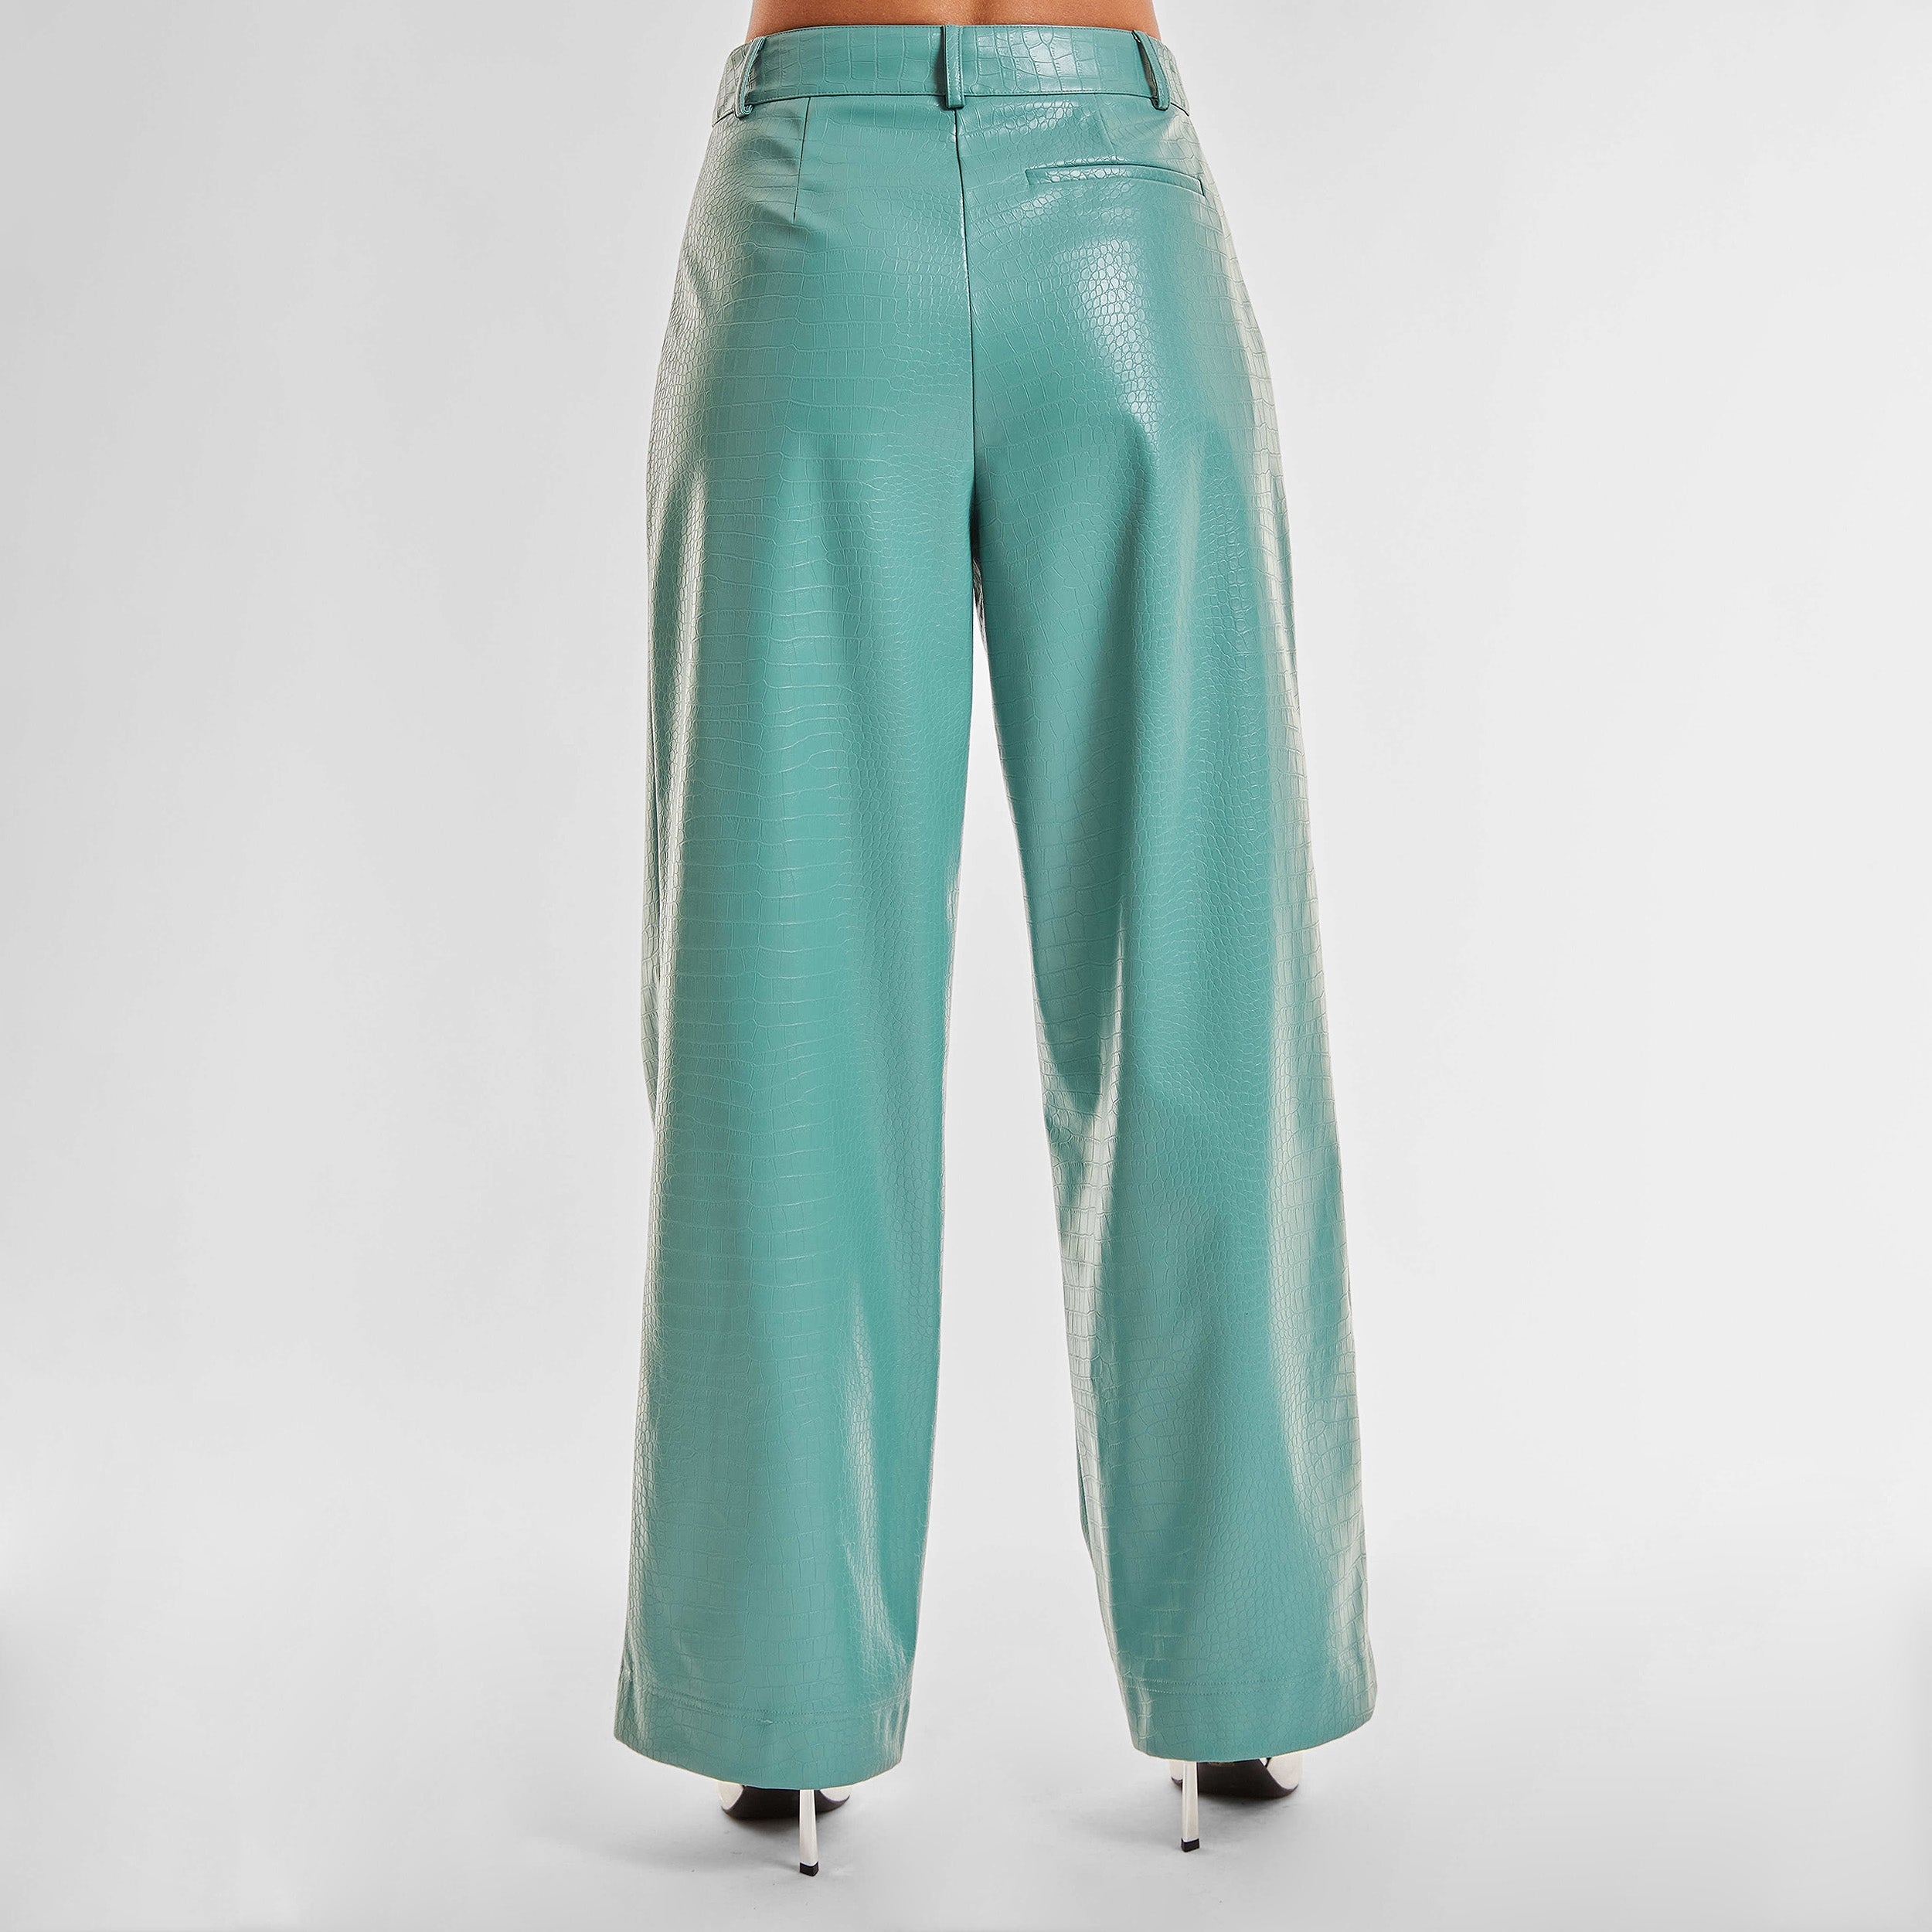 Rear view of woman wearing sage colored faux leather croco pattern embossed wide leg pant.